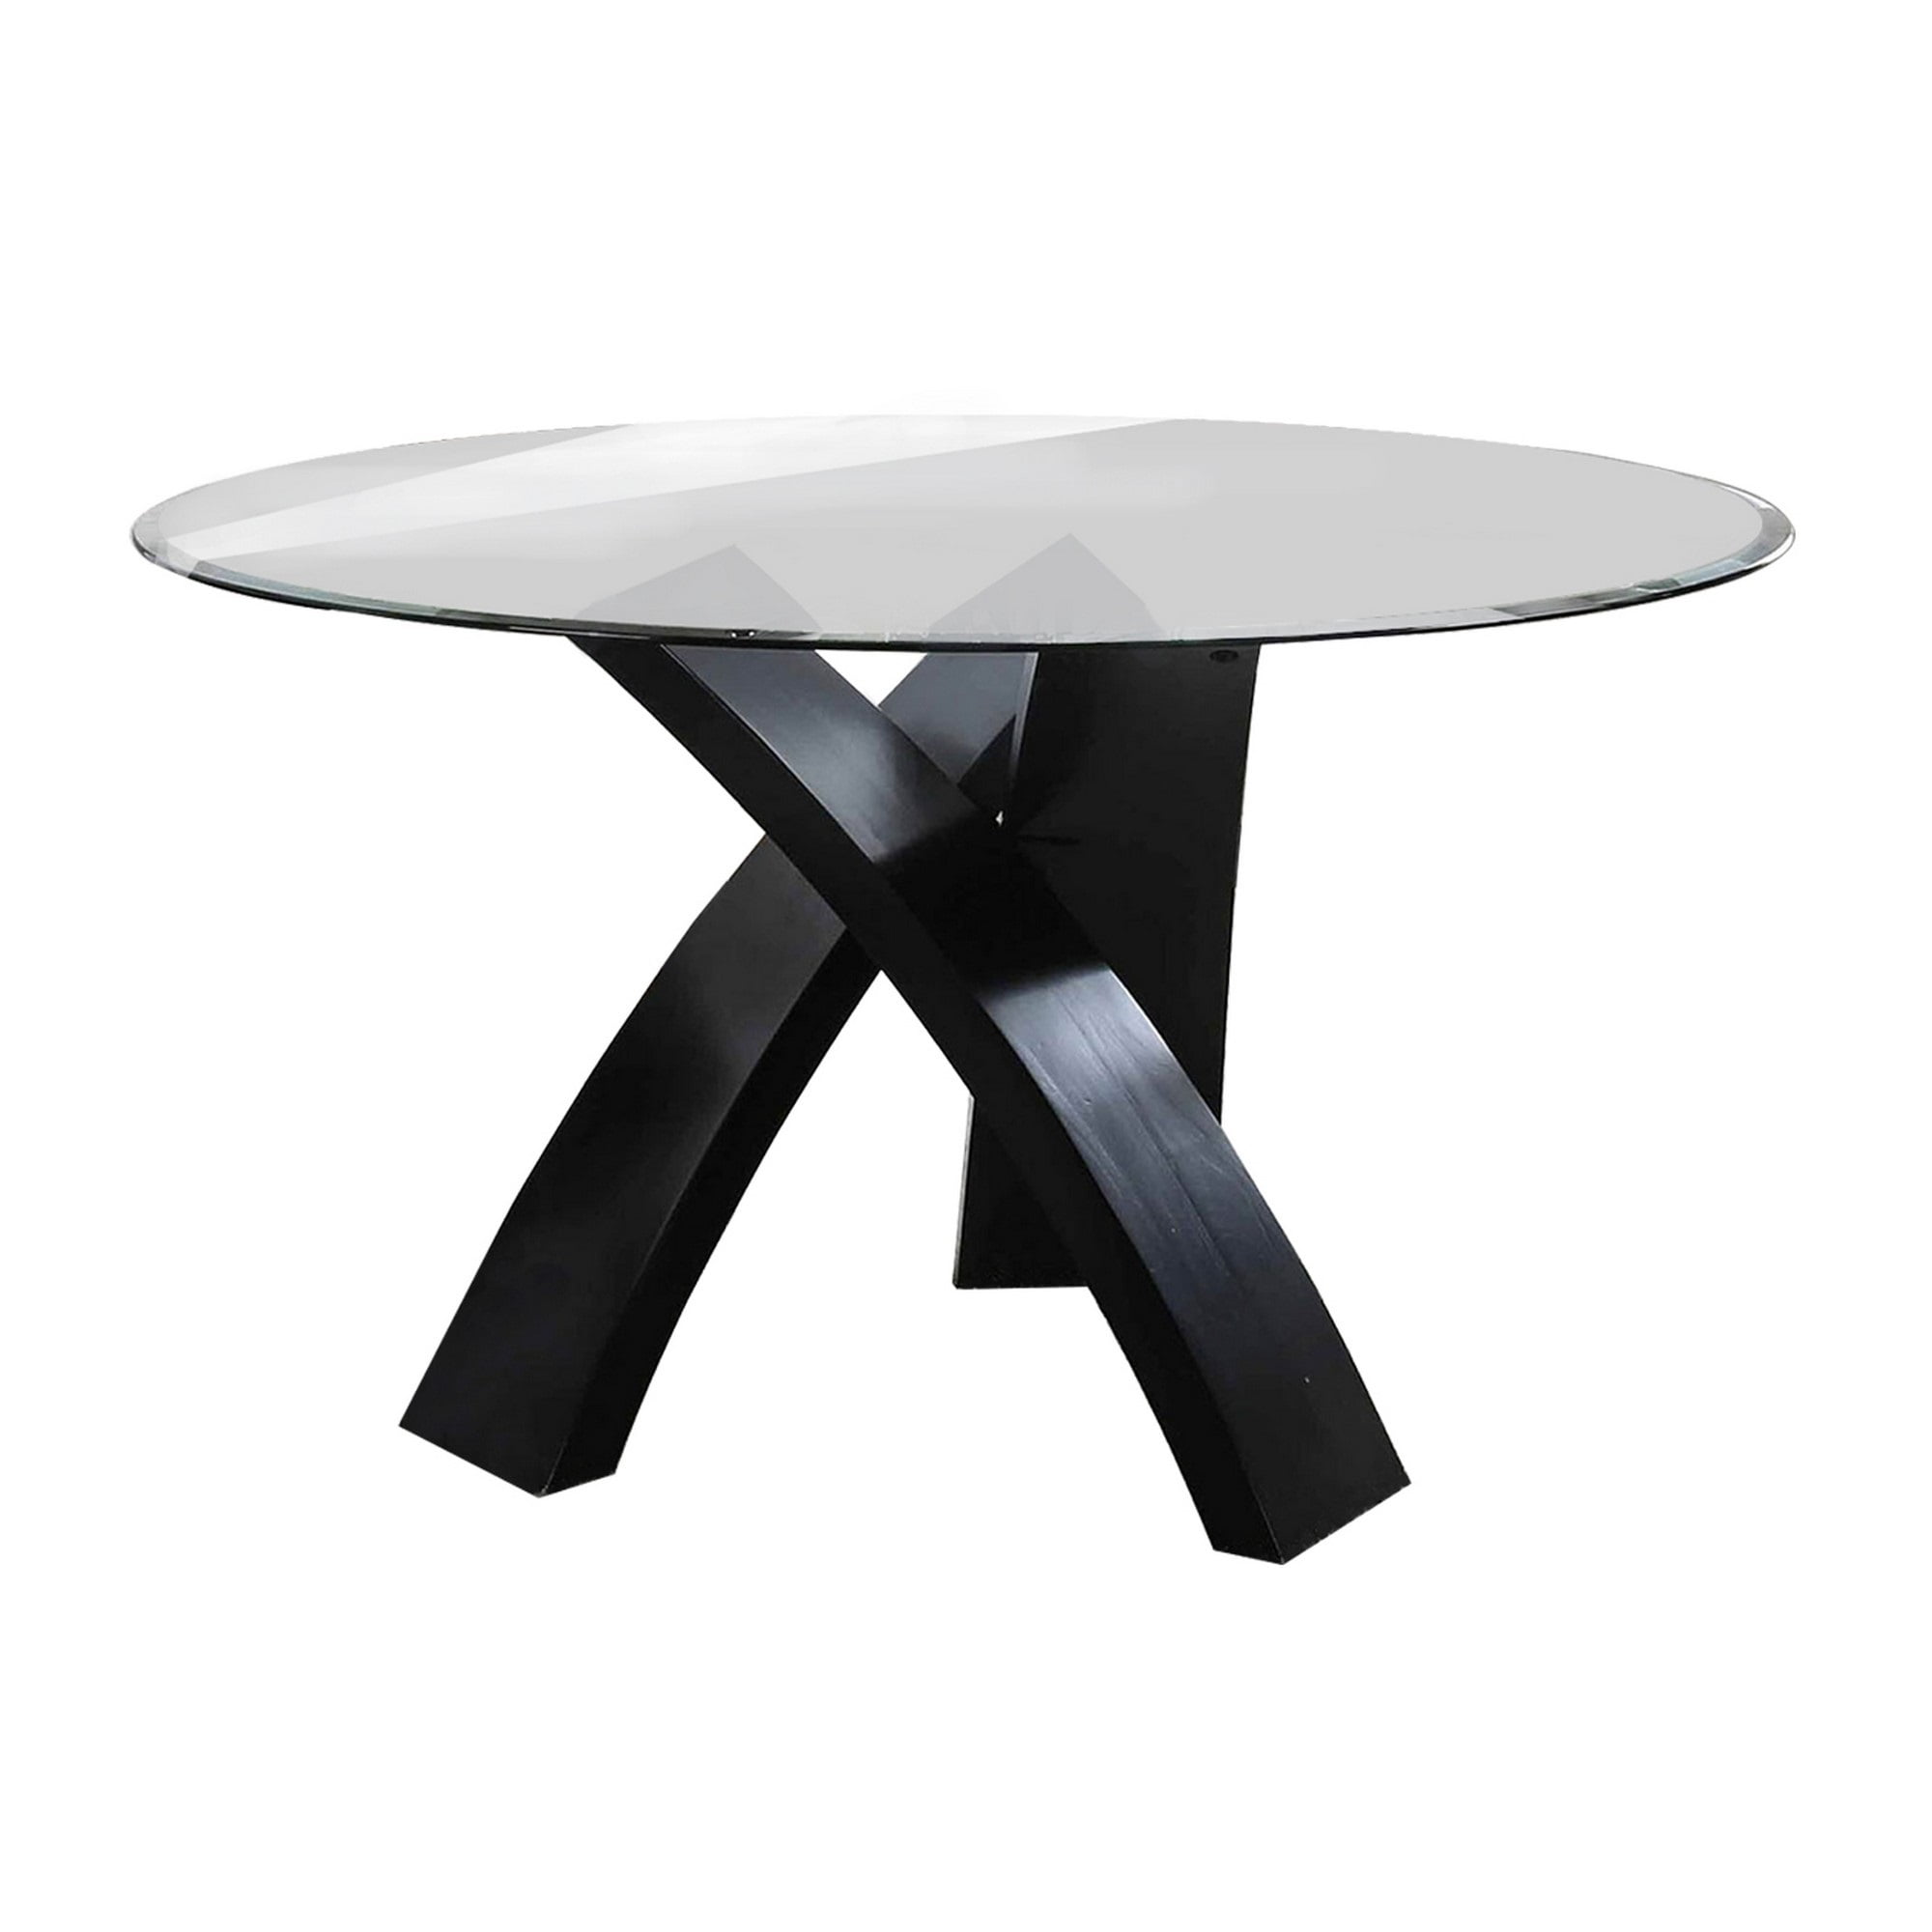 Black Benjara Round Glass Top Dining Table with Criss Cross Tripod Base